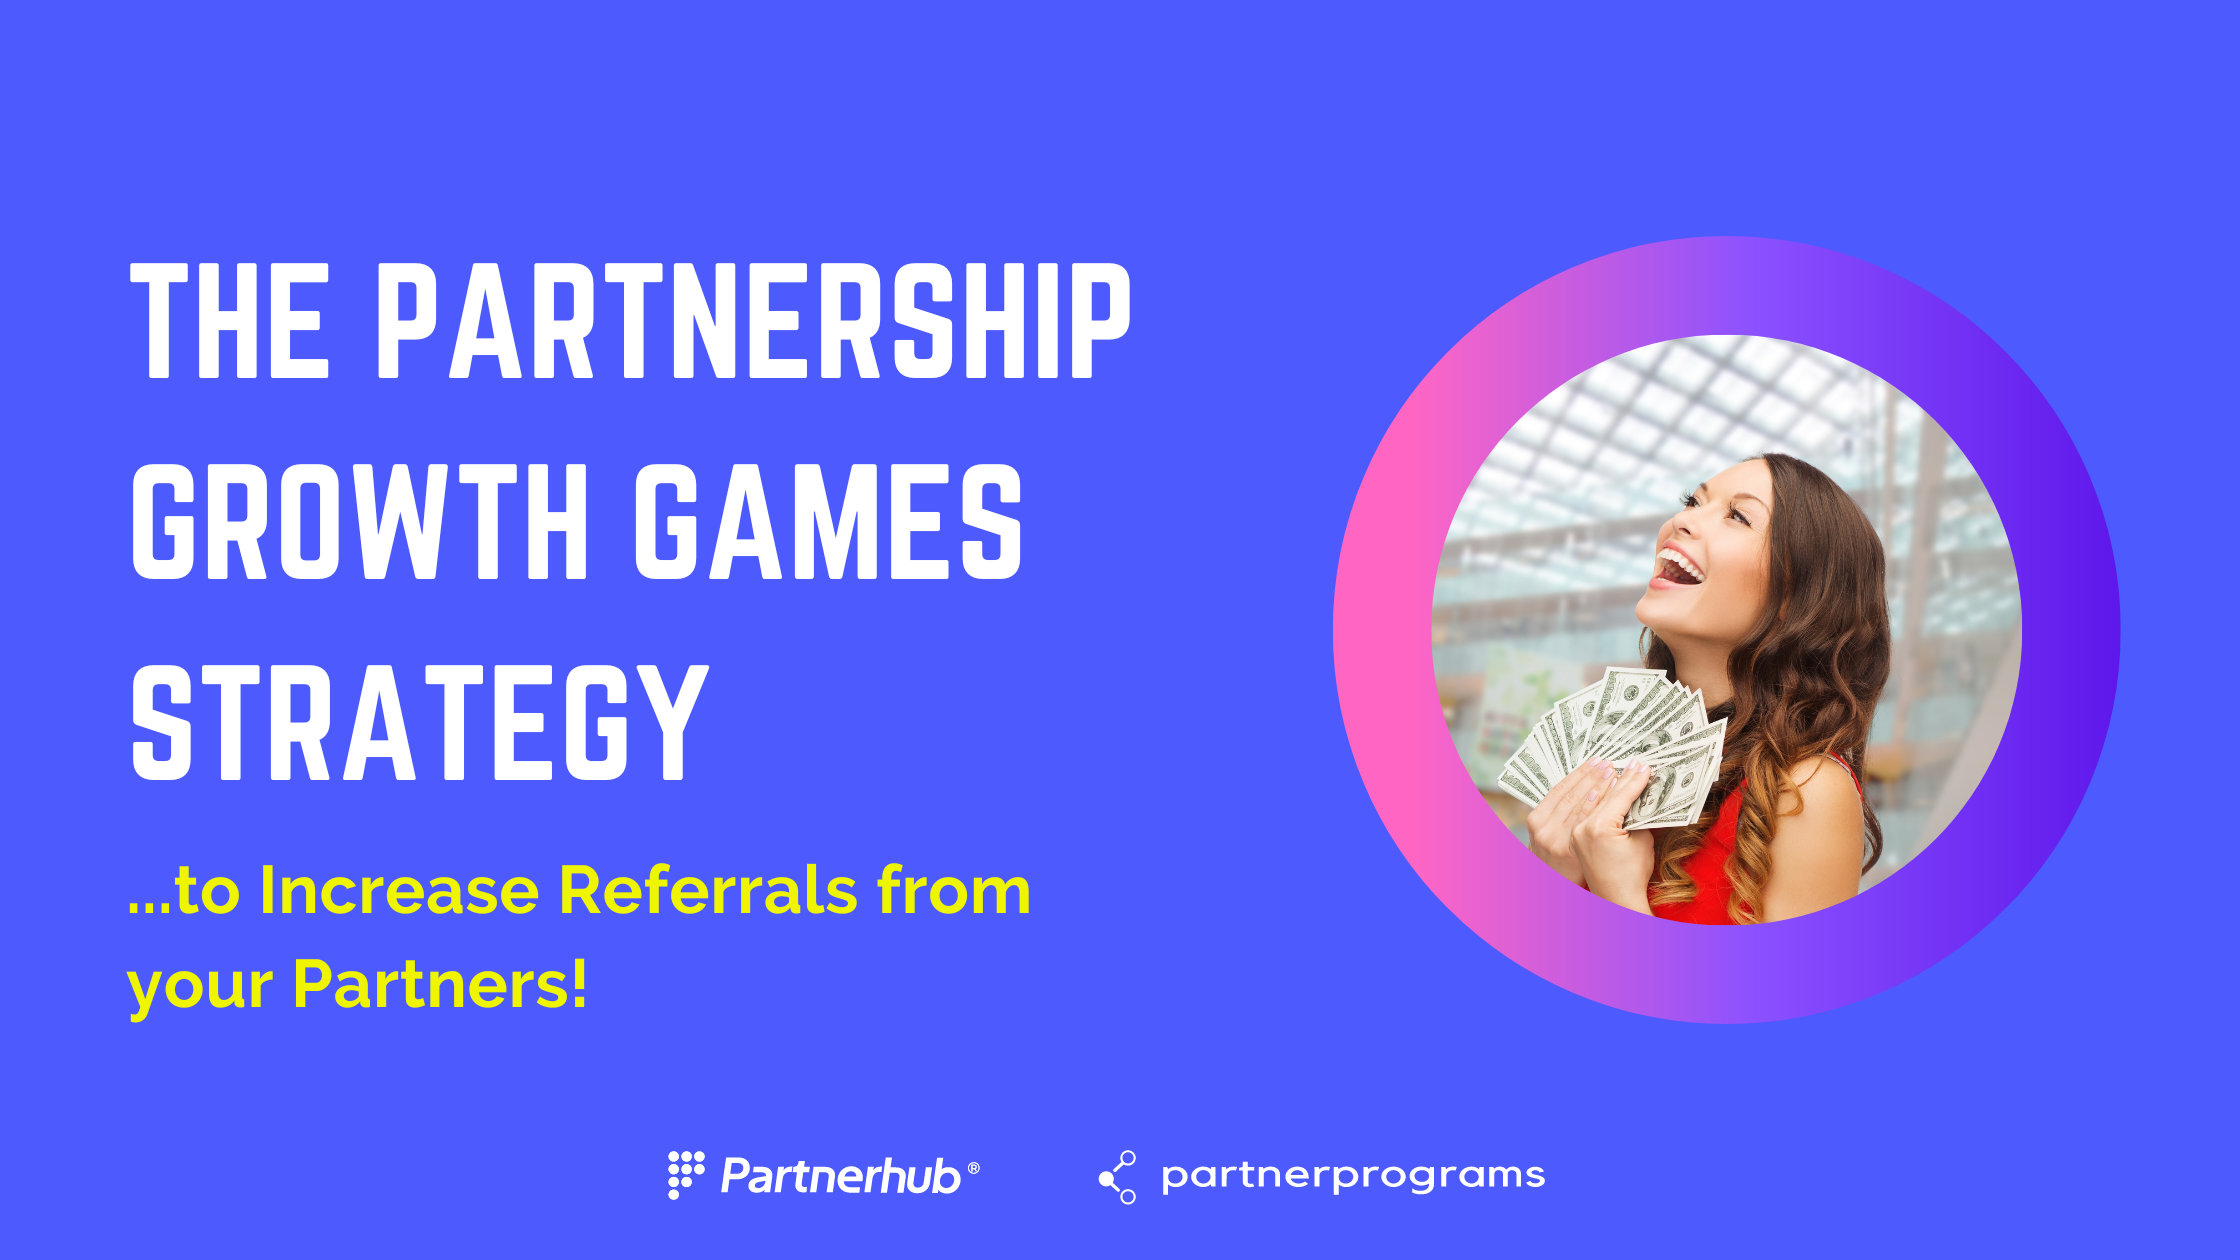 The Partnership Grow th Games Strategy to Increase Referrals from your Partners